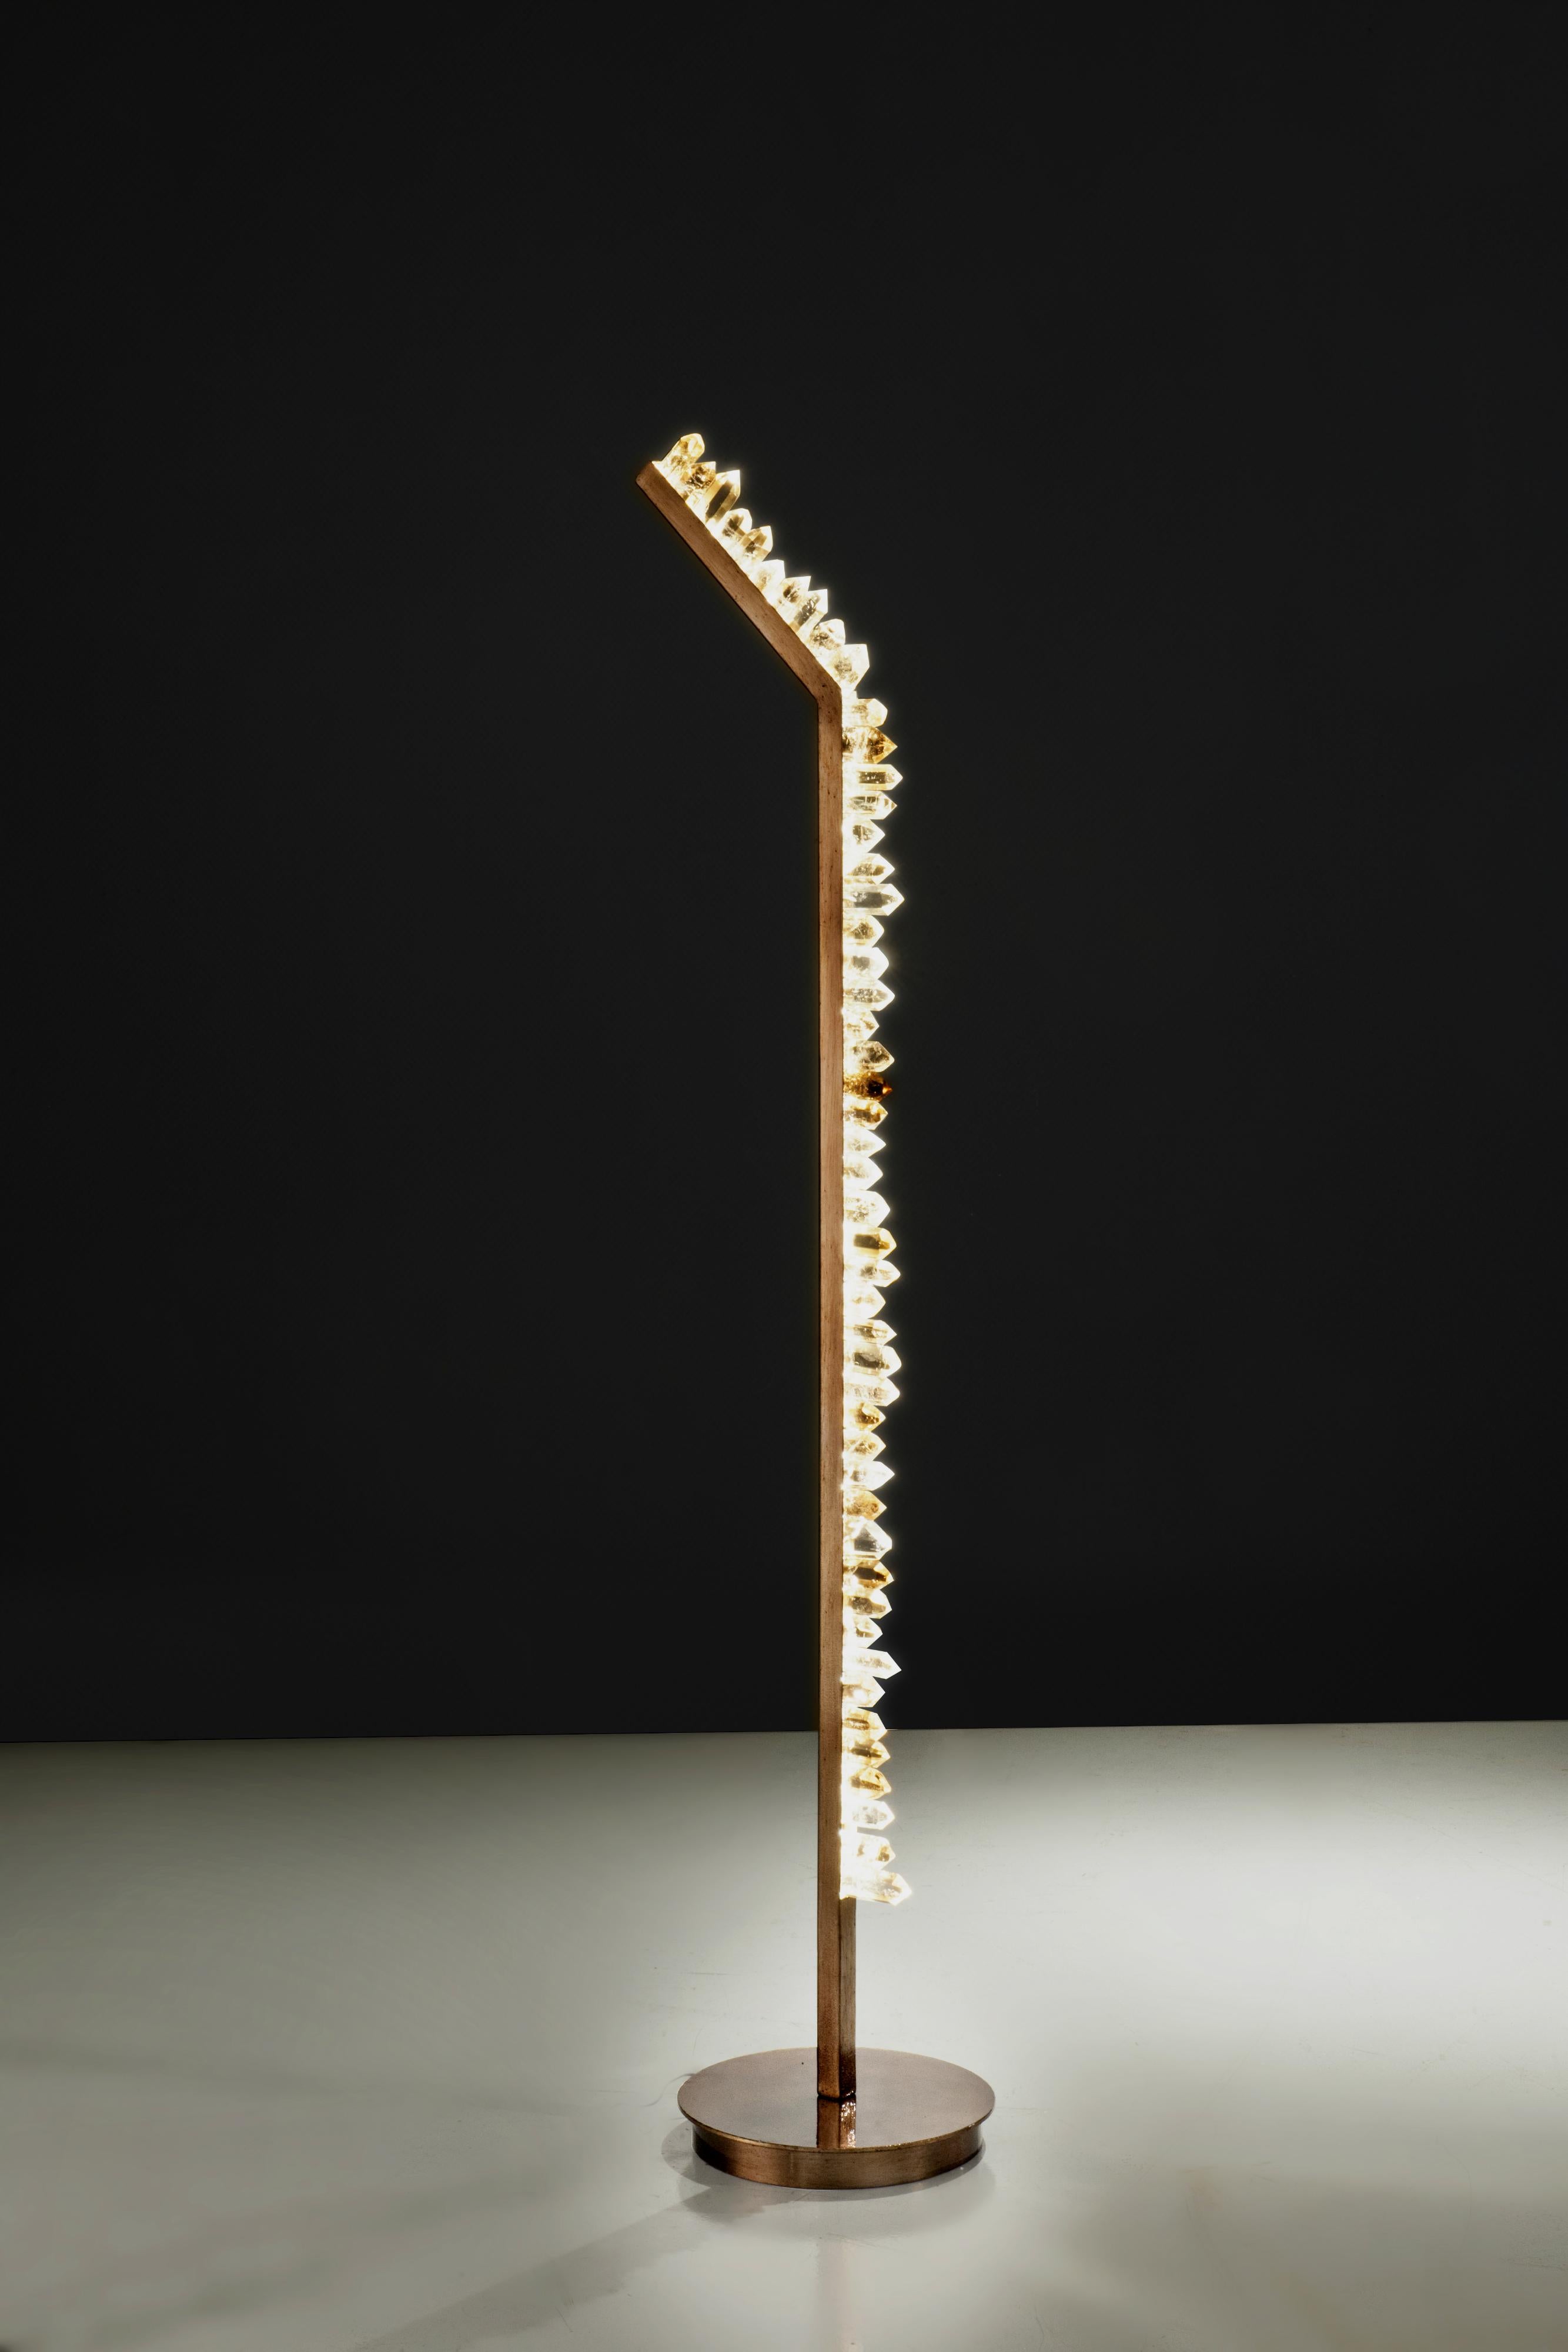 Hand-sculpted white and smoked quartz floor lamp by Aver
Sculpted lamp with quality natural quartz
Measures: 170 x 30 x 20 cm
01 X LED 7W / 450 lumens.